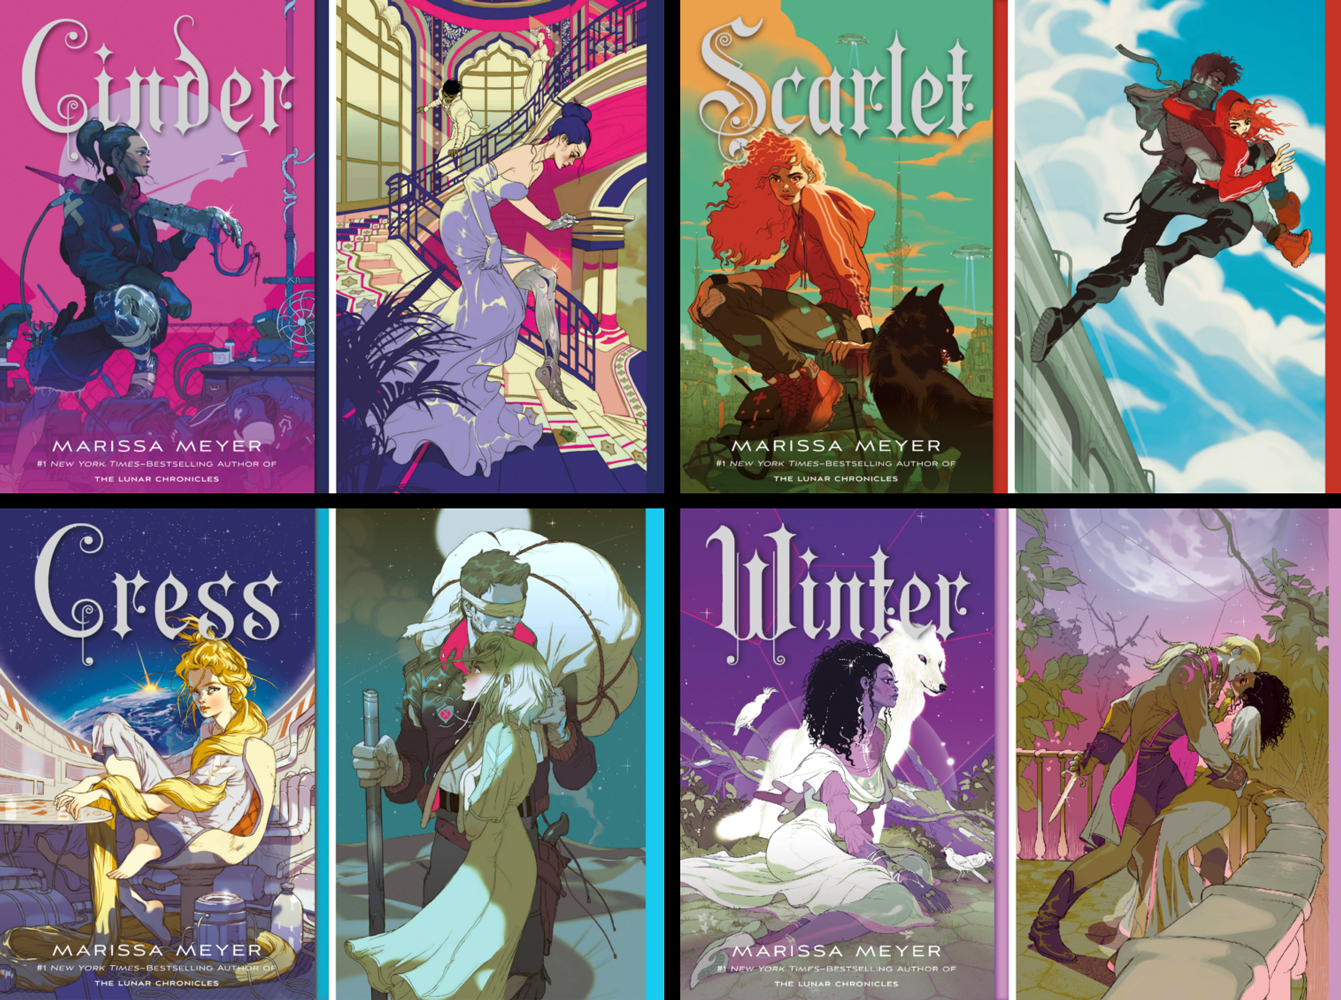 PHOTO: Each of the four main books redesigned from the Lunar Chronicles by Marissa Meyers. Photo courtesy of Marissa Meyers and Macmillan Publishers. SOURCE: https://www.marissameyer.com/blogtype/the-lunar-chronicles-redesigned-paperbacks-are-available-now/